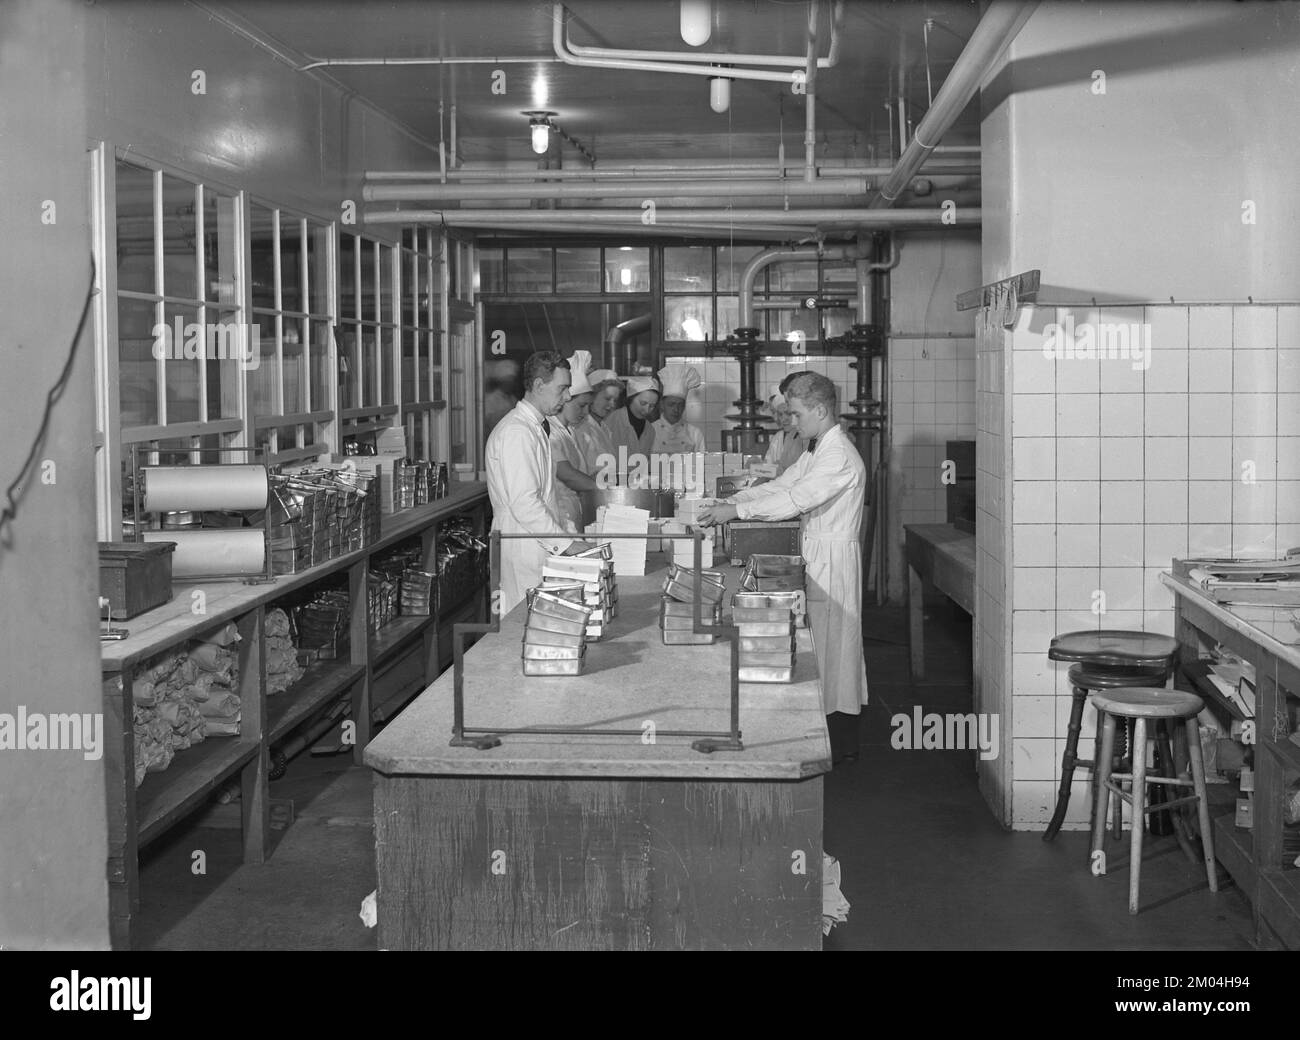 In the 1930s. The company Matexpressen and it's kitchen where they produce ready to eat dishes delivered by their messangers to the customers home. Not unlike today's service of food delivery and takeaway companys like Uber eats, Deliveroo, Just eat. This company had bad timing in starting their business with the second world war breaking out and was out of business in the middle of the 1940s. Sweden november 1939 Kristoffersson ref 11-9 Stock Photo